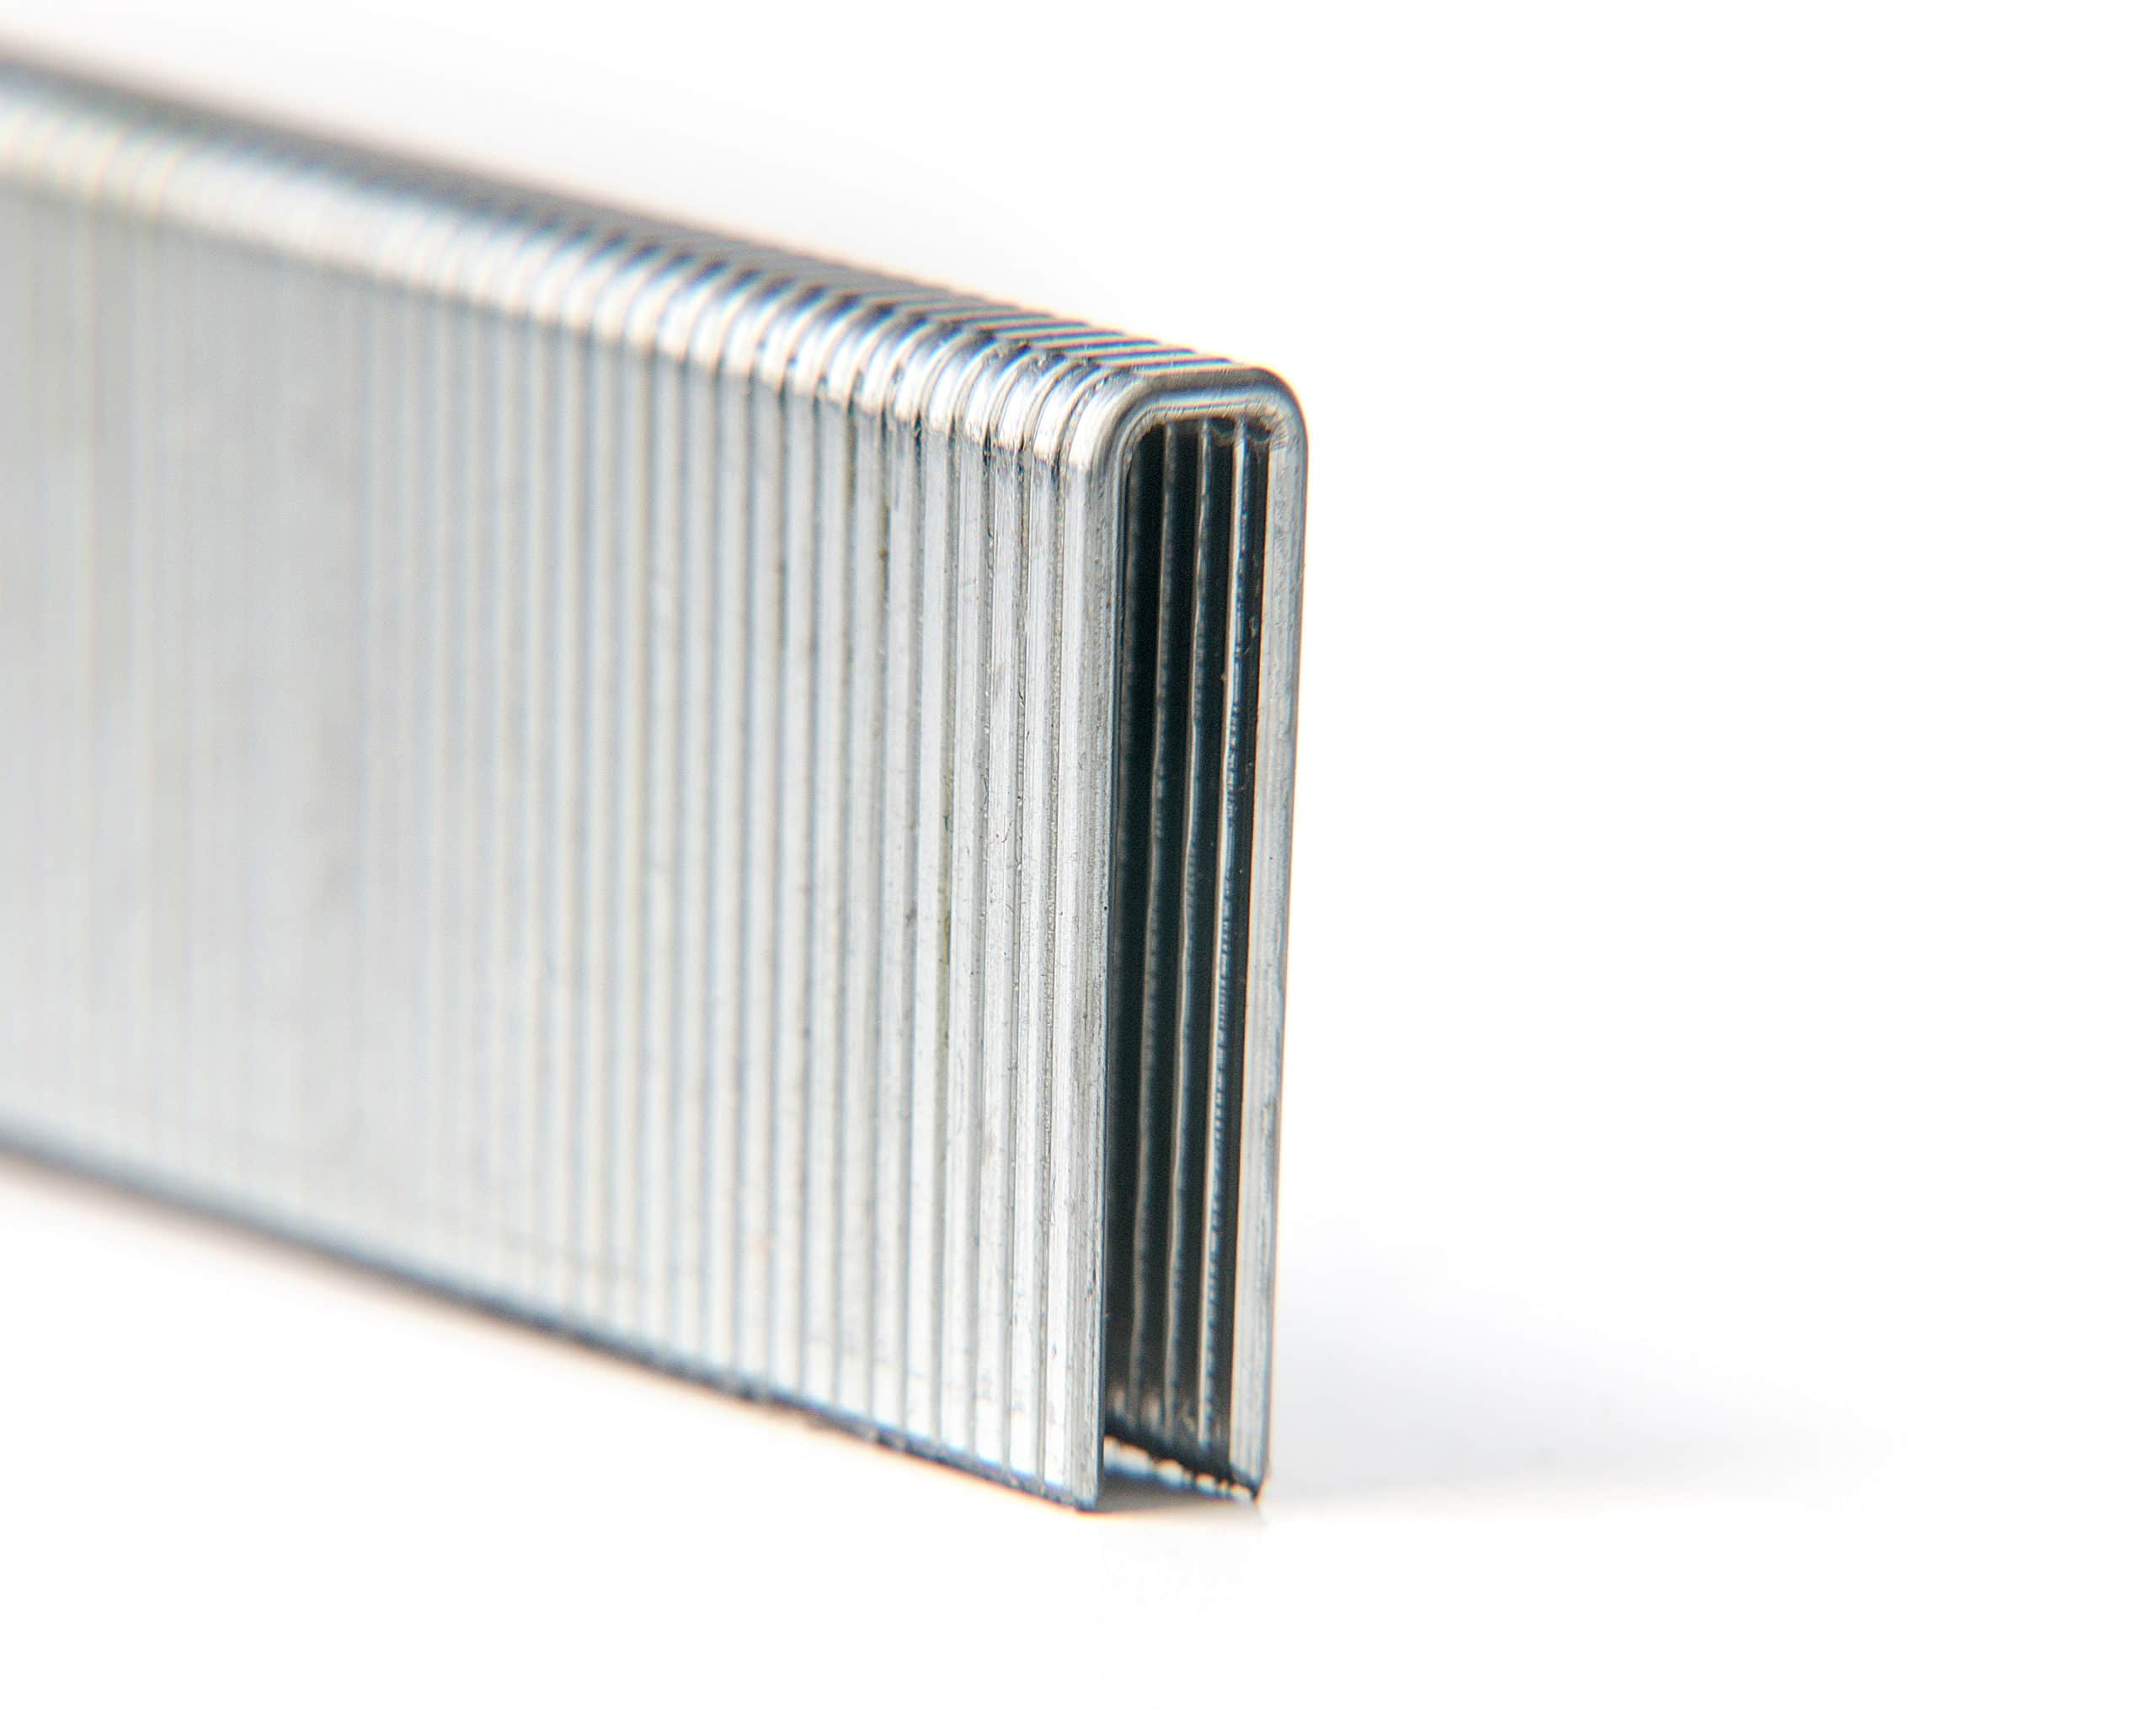 meite 18GA 1/4" Crown K Series Galvanized Staples in Length from 1/2" to 1-1/2" 